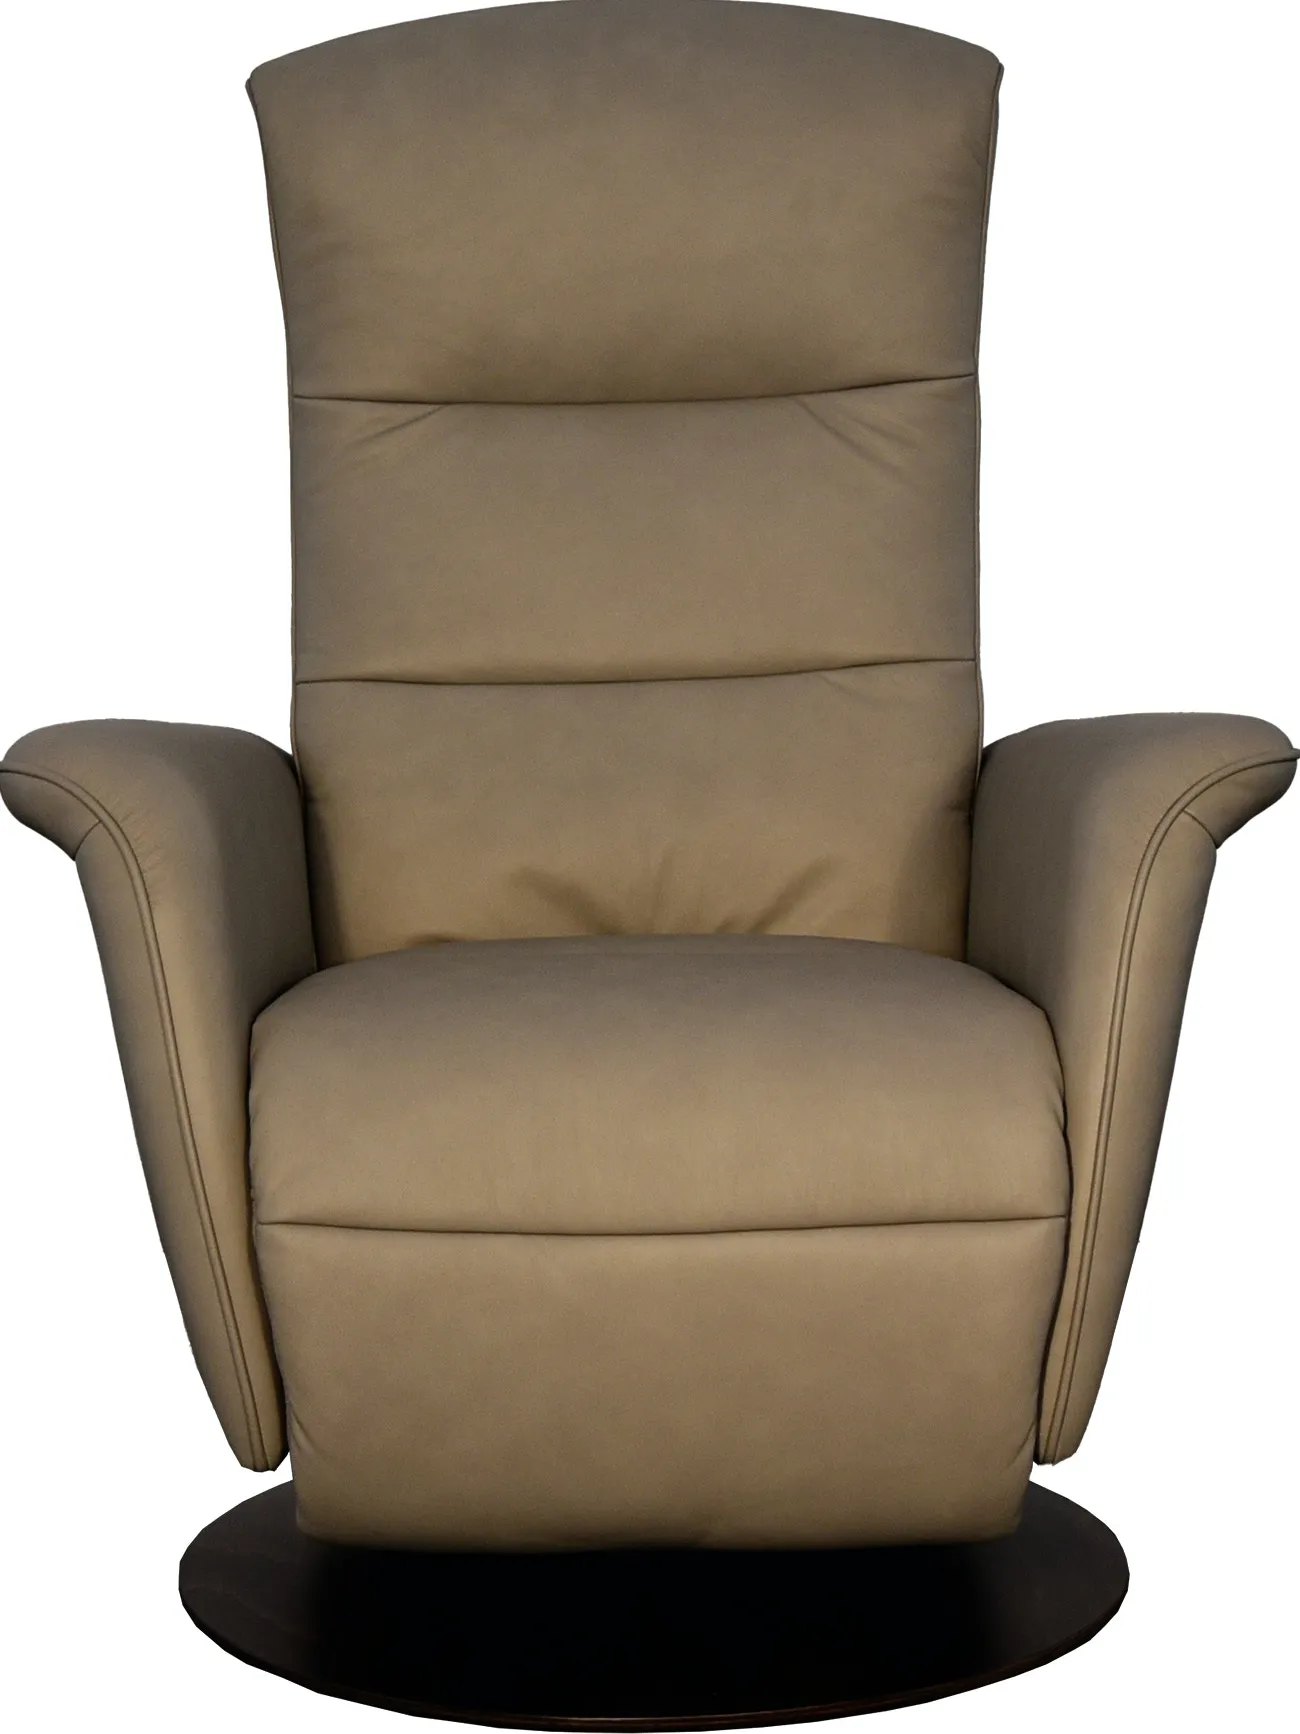 Stressless by Ekornes MIKE SMALL-WOOD BASE